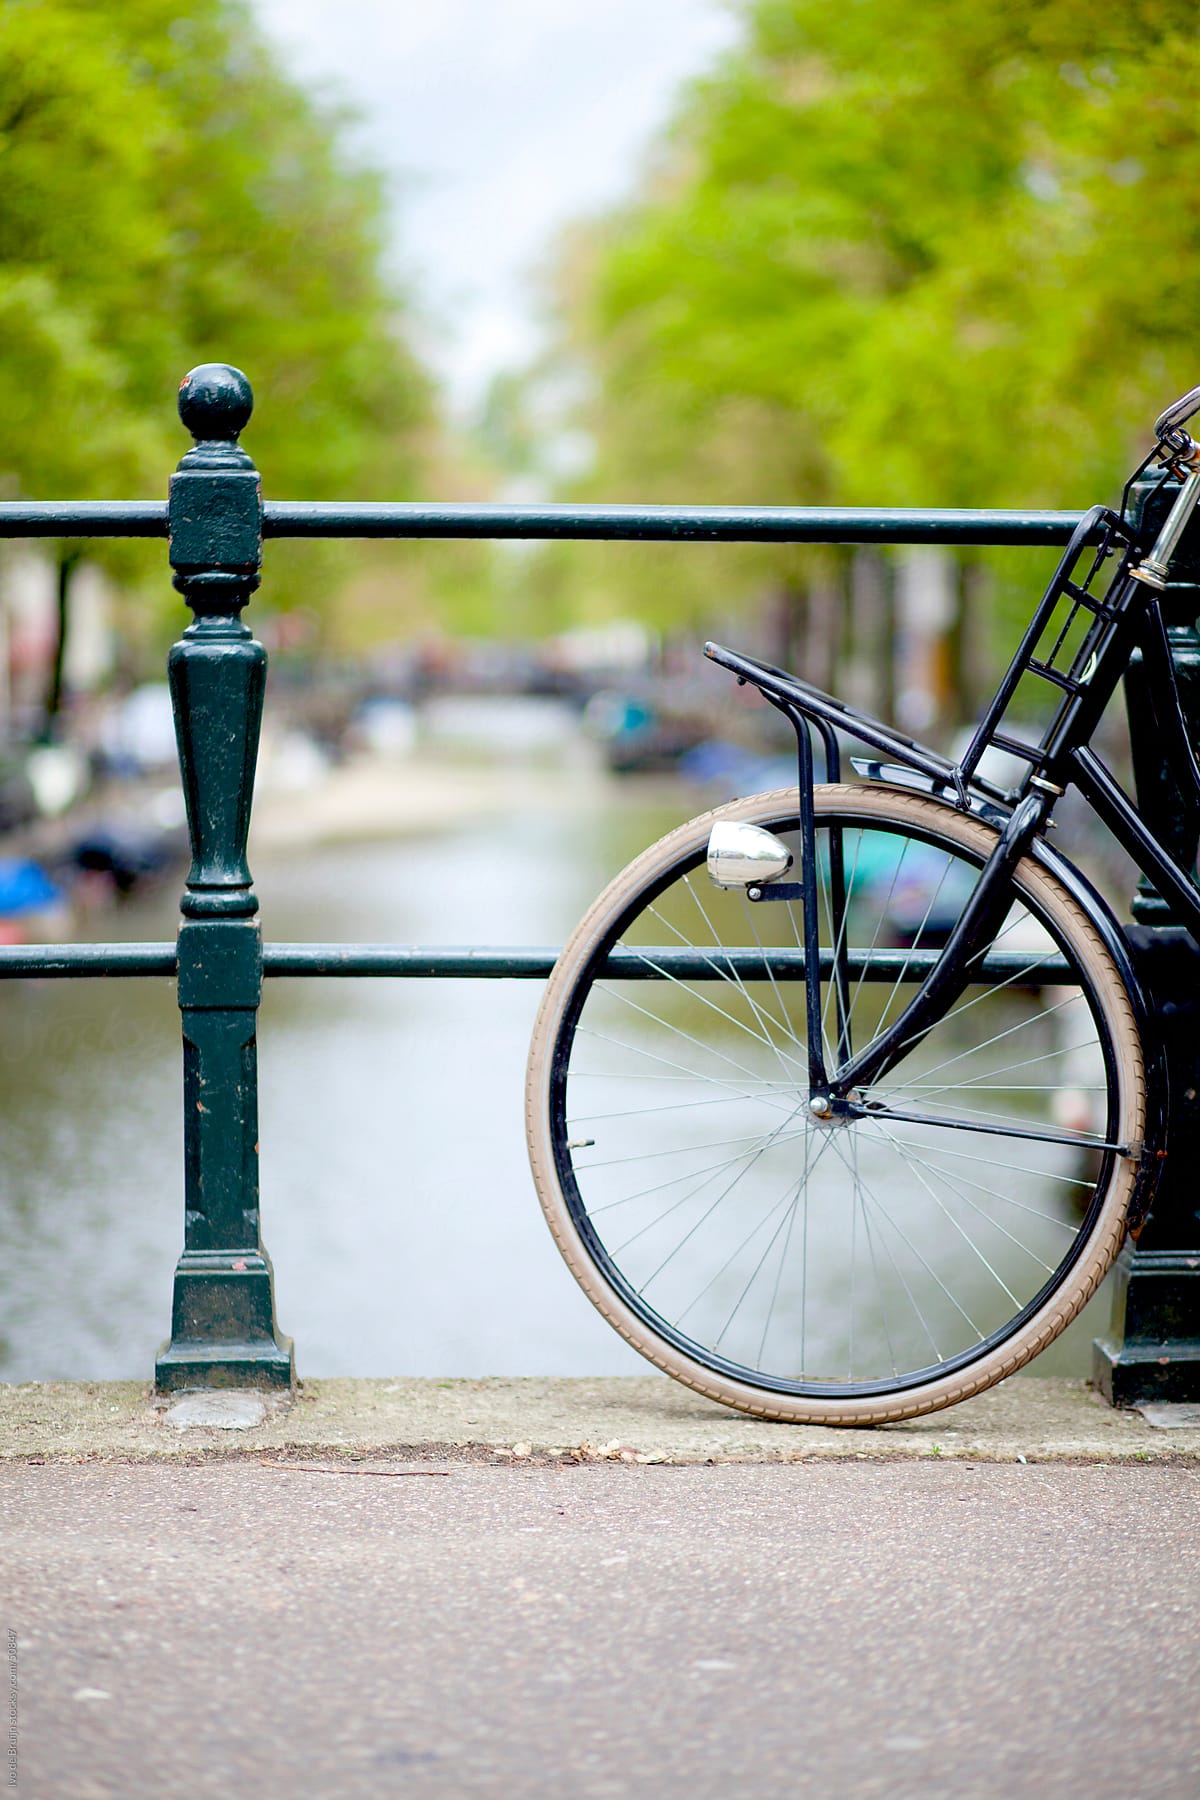 A classic bike standing on a bridge with an Amsterdam canal, trees and boats in the background